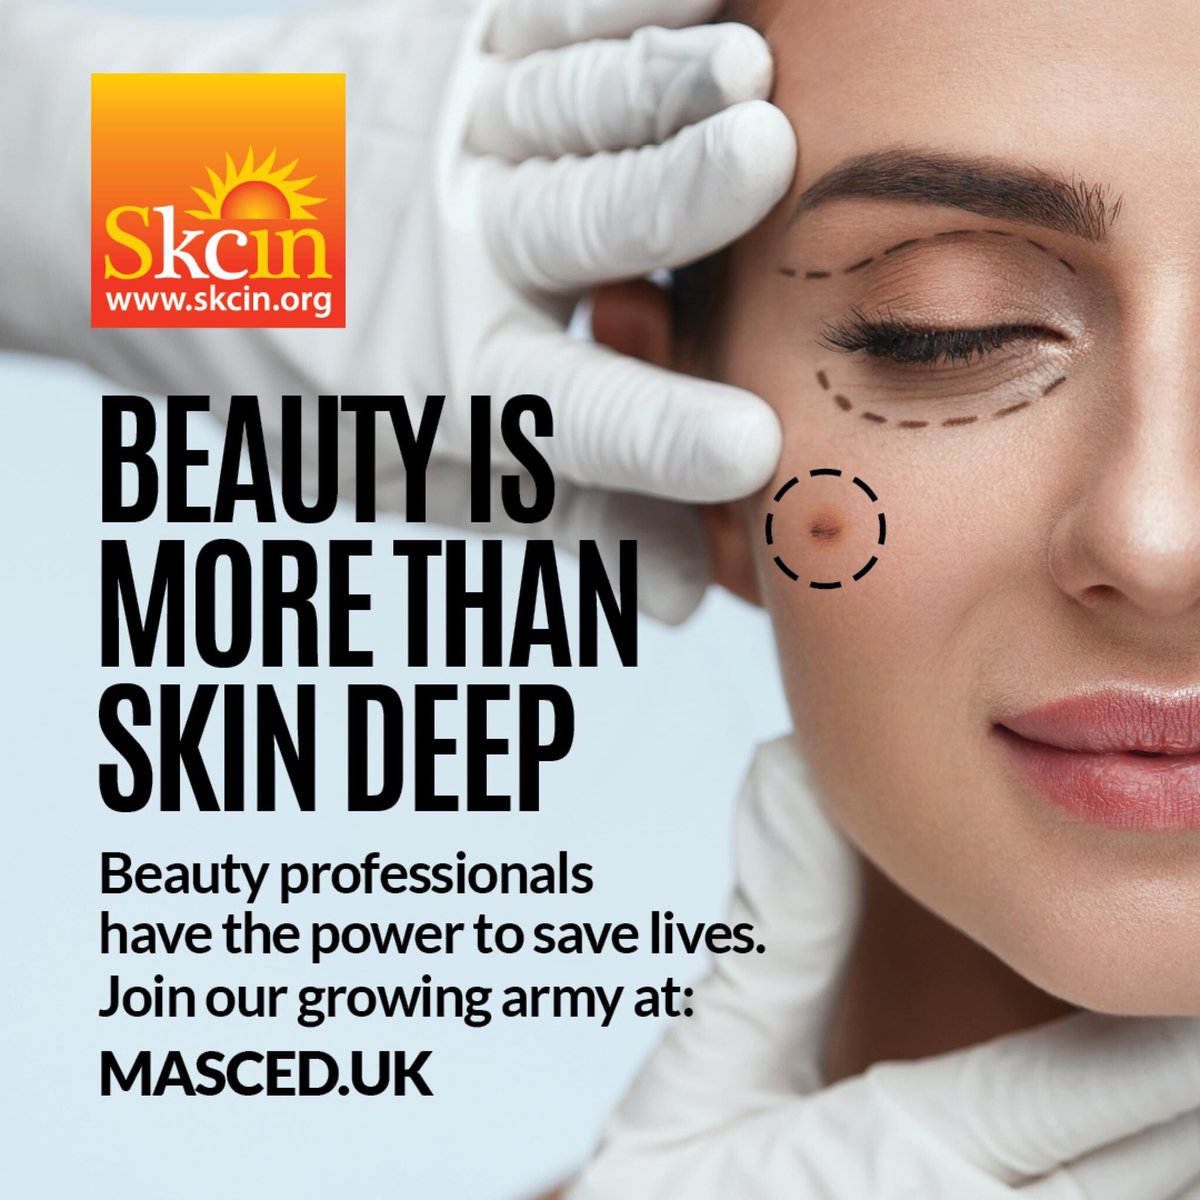 Skcin are ‘Training Eyes to Save Lives’ across the hair, beauty and healthcare industries nationwide. If you have regular observation of people’s skin through the course of your work & are committed to the health and wellbeing of your clients register for Masced.uk